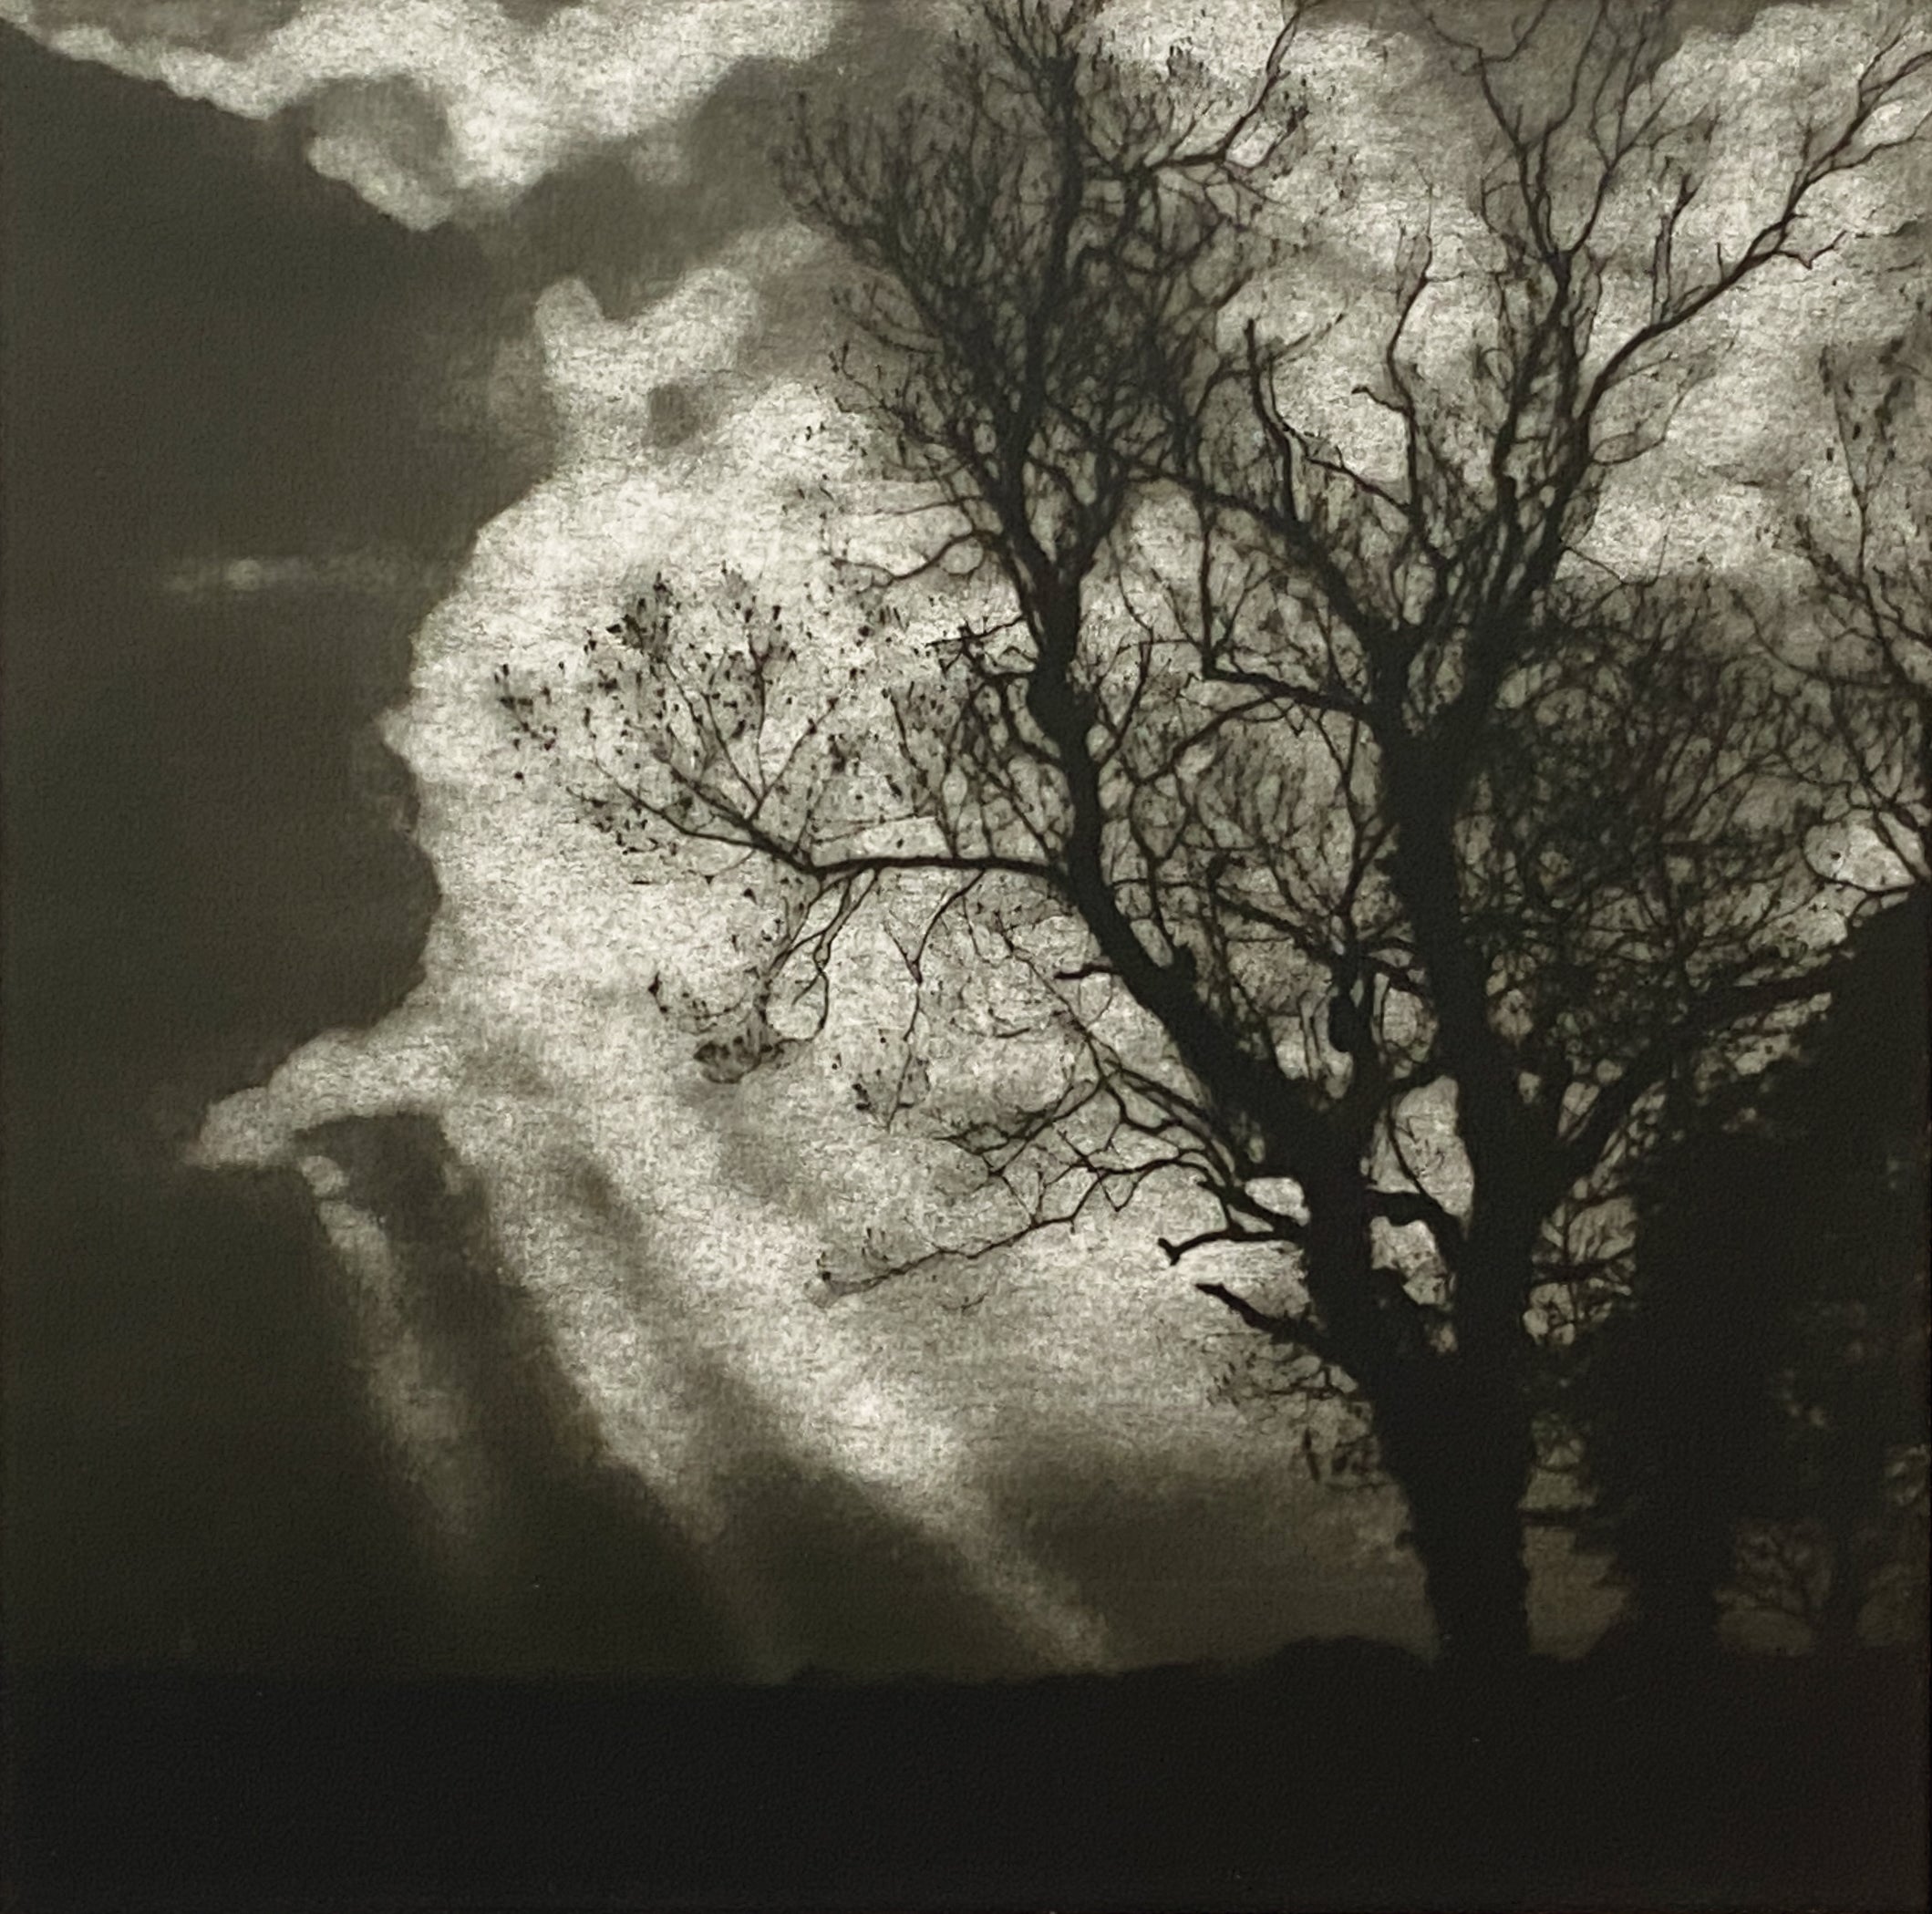 Sunlight pierces clouds through the trees. A silver gelatin photograph from a paper negative adds texture and elevates contrast and light.